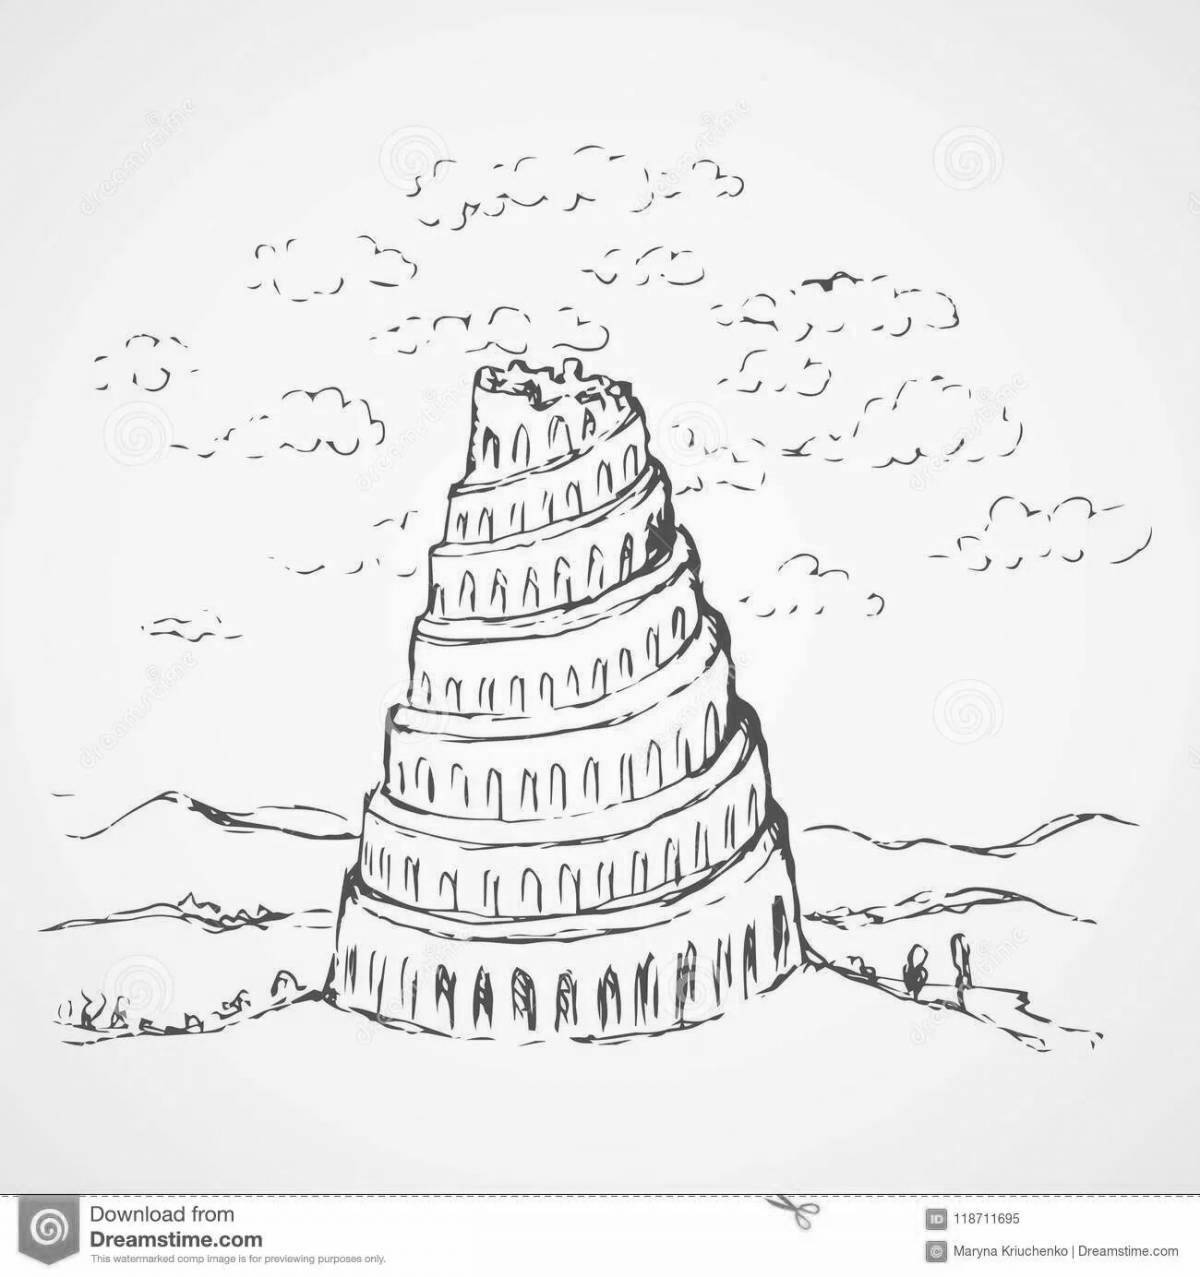 Tower of Babel #5